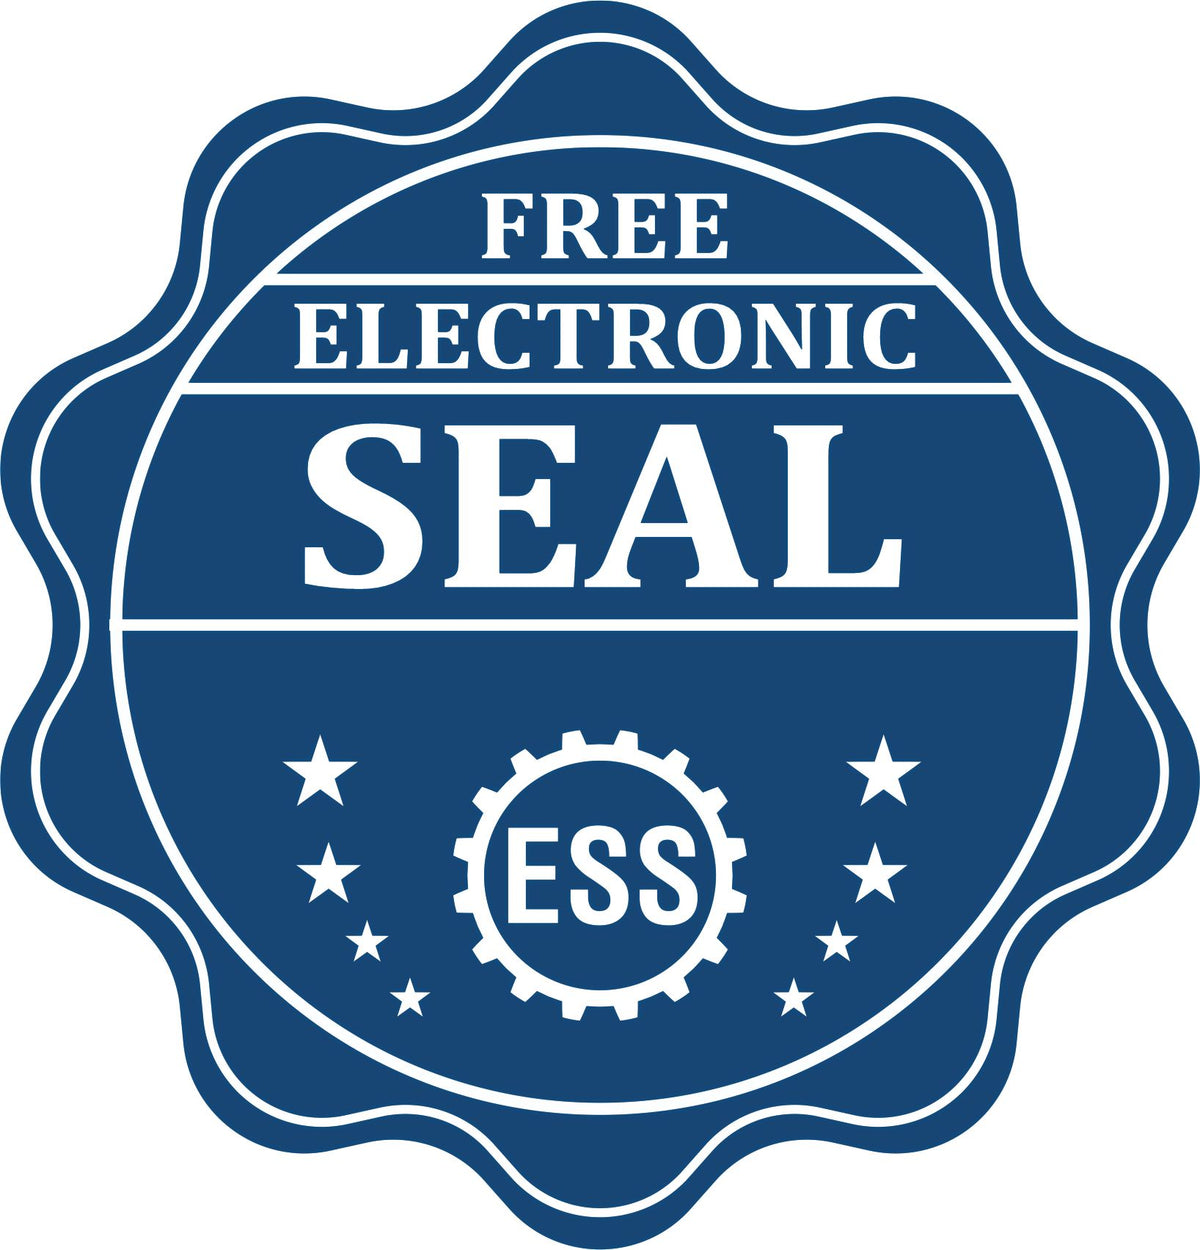 A badge showing a free electronic seal for the State of Iowa Architectural Seal Embosser with stars and the ESS gear on the emblem.